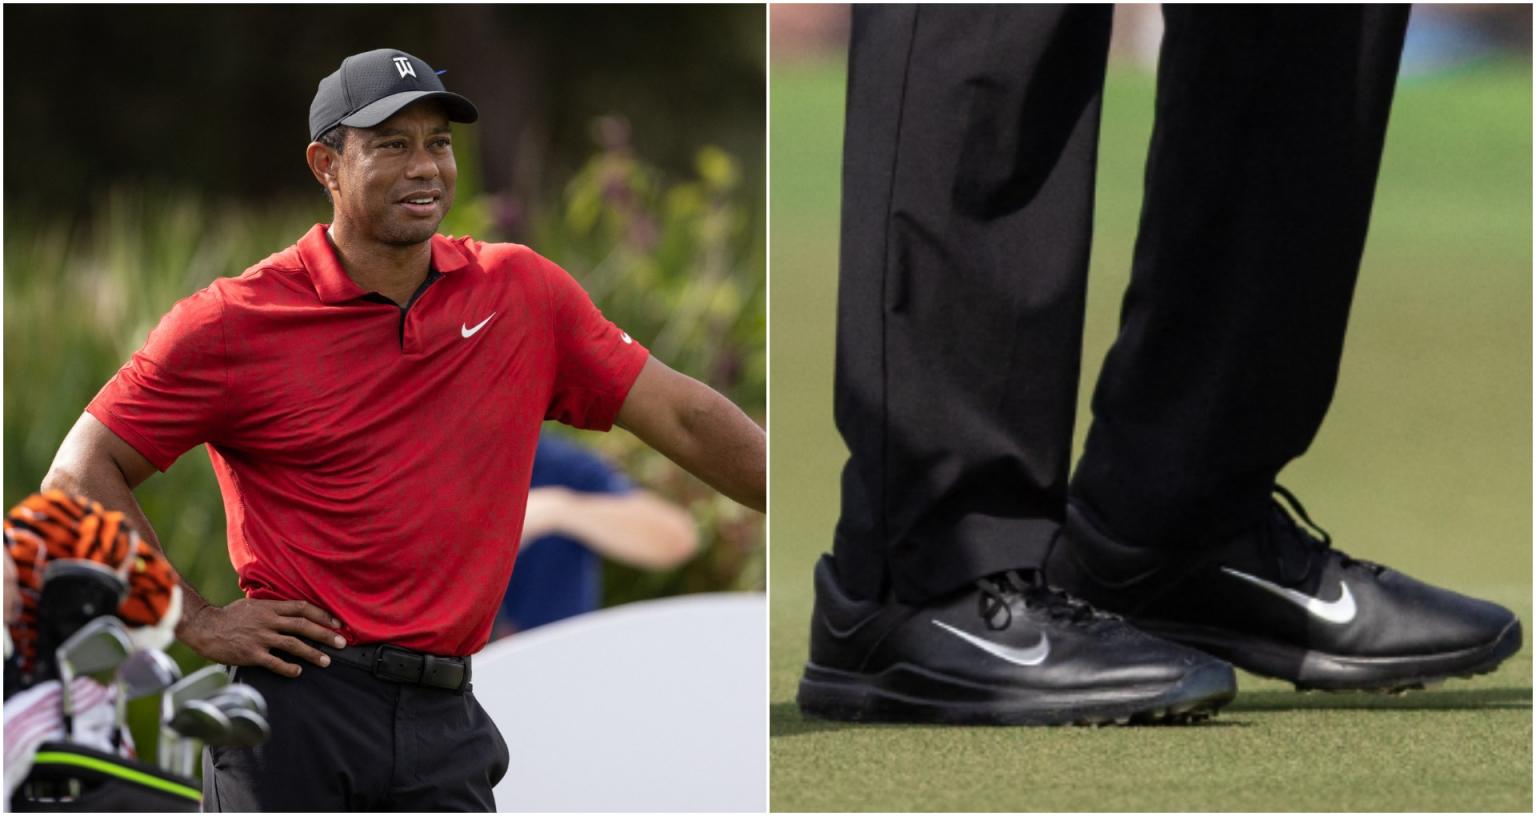 Why was Tiger Woods wearing FootJoy golf shoes at Augusta instead of